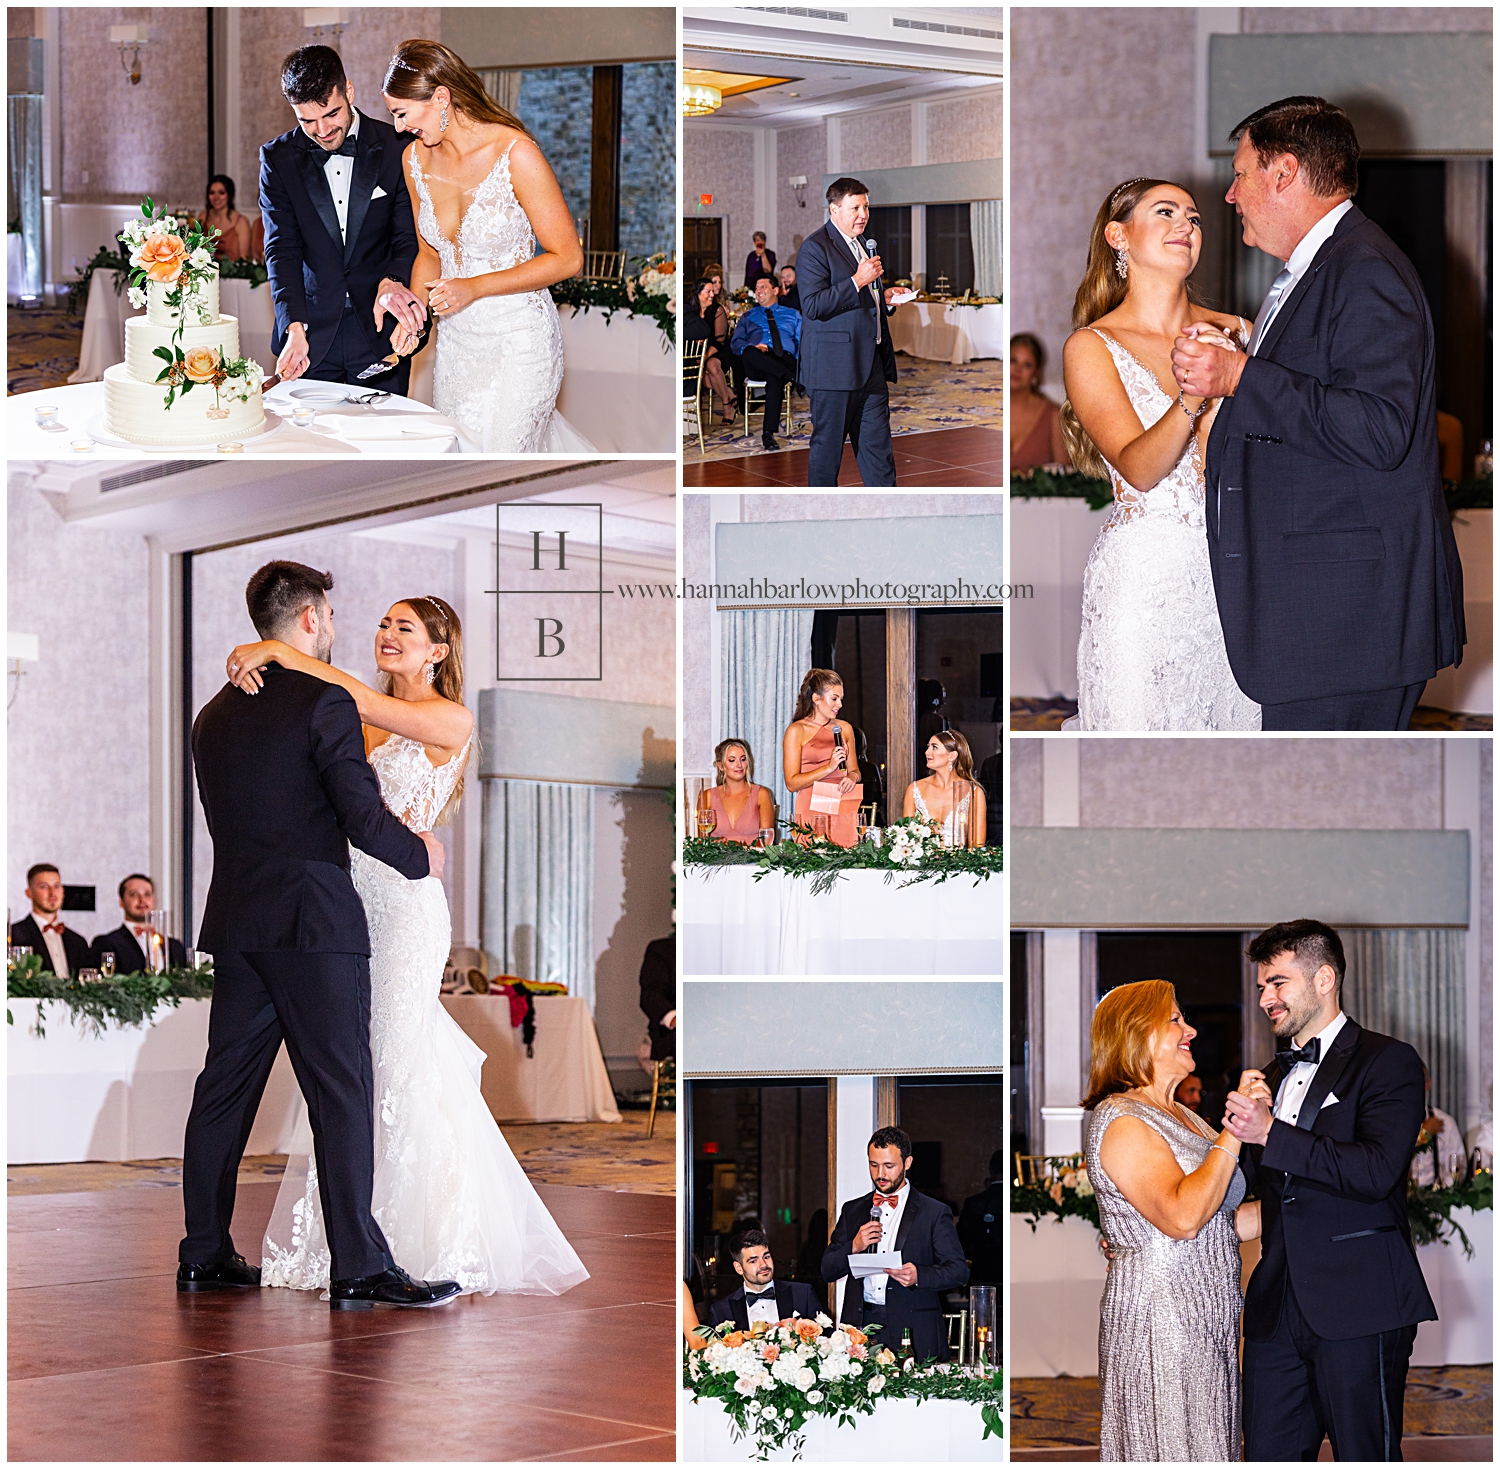 Key special moments at wedding reception are highlighted.